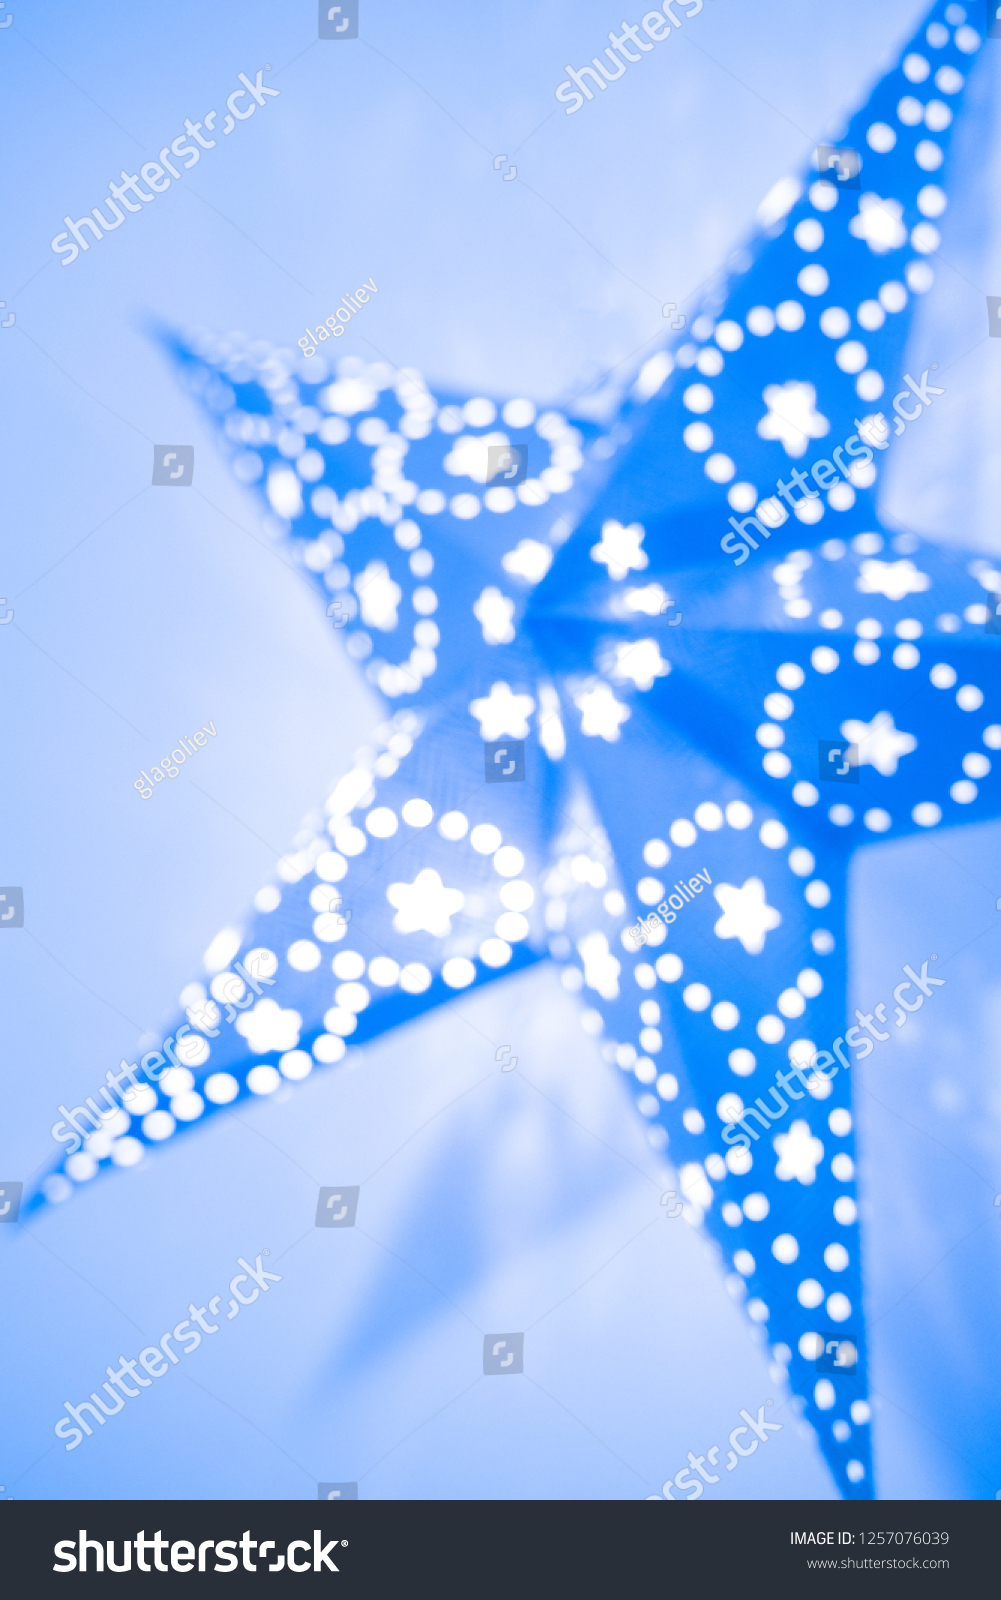 Christmas blur background with decorative star.  Decorative star with lamps on blue background. #1257076039